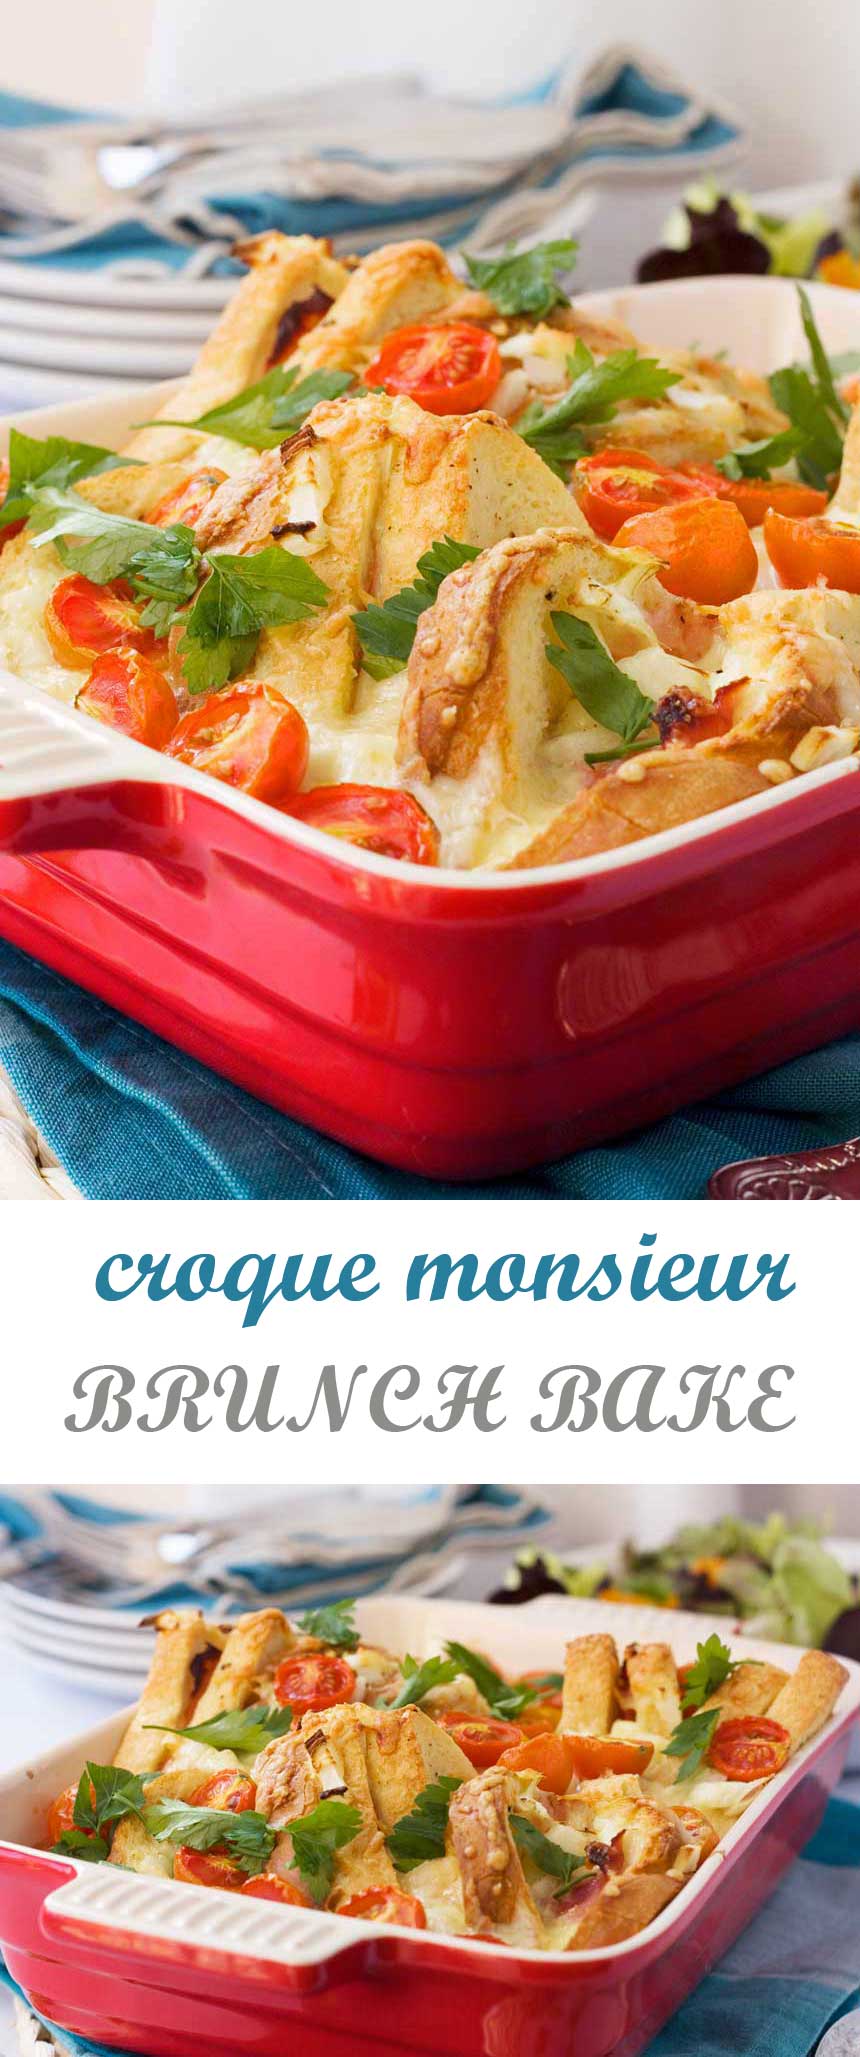 A closeup of the side of a baking dish of Croque monsieur brunch bake with a title below it for Pinterest.